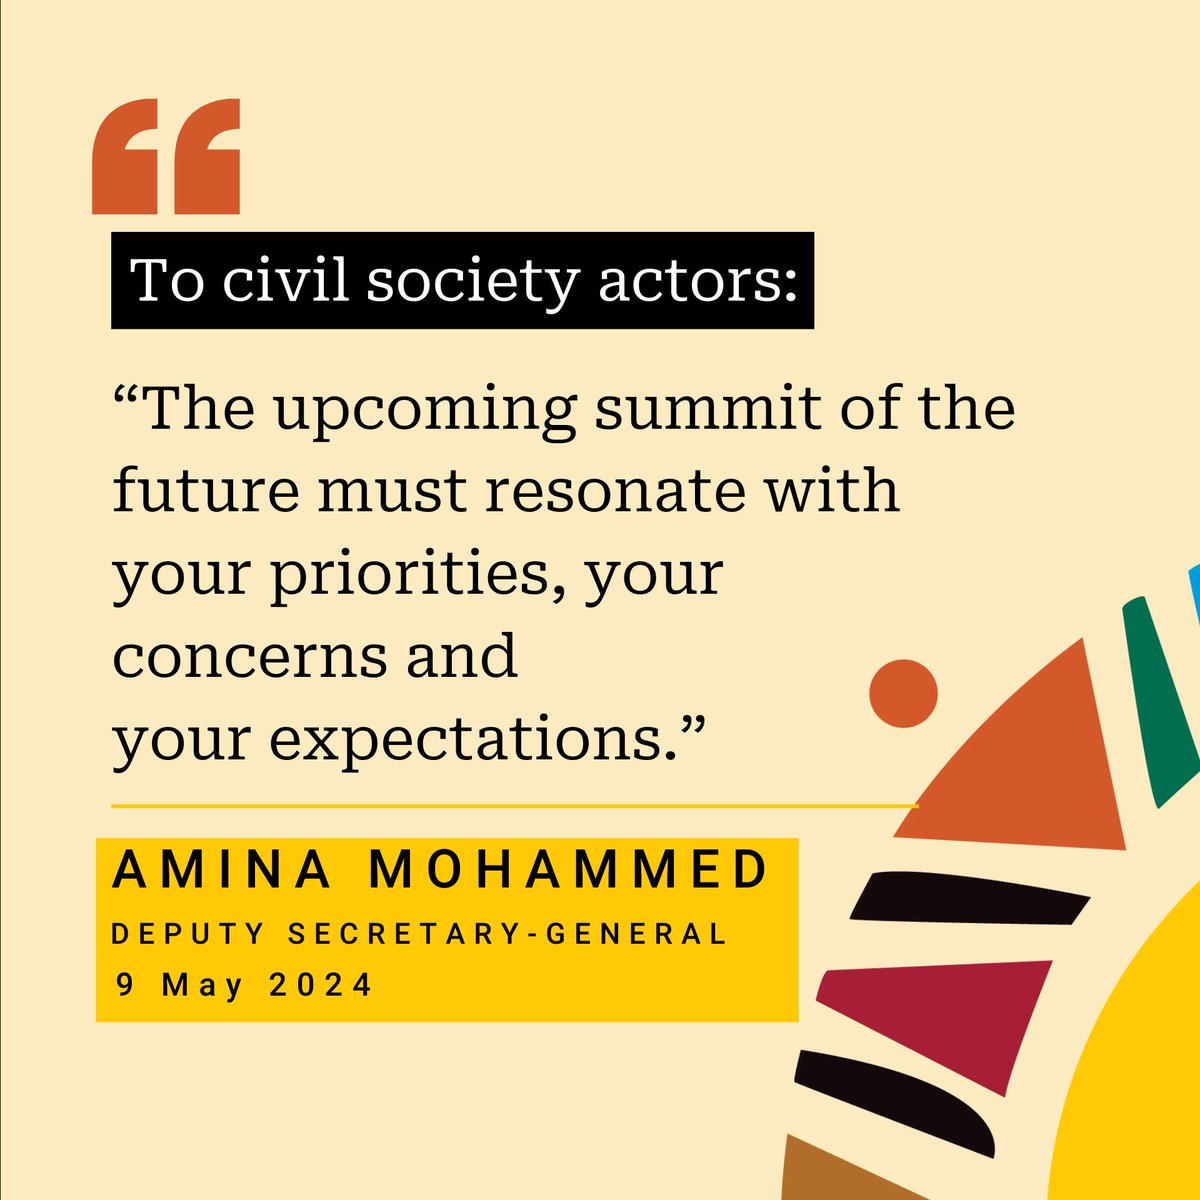 The 69th @UN Civil Society Conference is #HappeningNow in Nairobi, Kenya, for the first time ever in Africa. 70% of the registered organizations are from Africa & 40% are youth-led. @AminaJMohammed urged civil society to raise their voices ahead of the Summit of the Future.